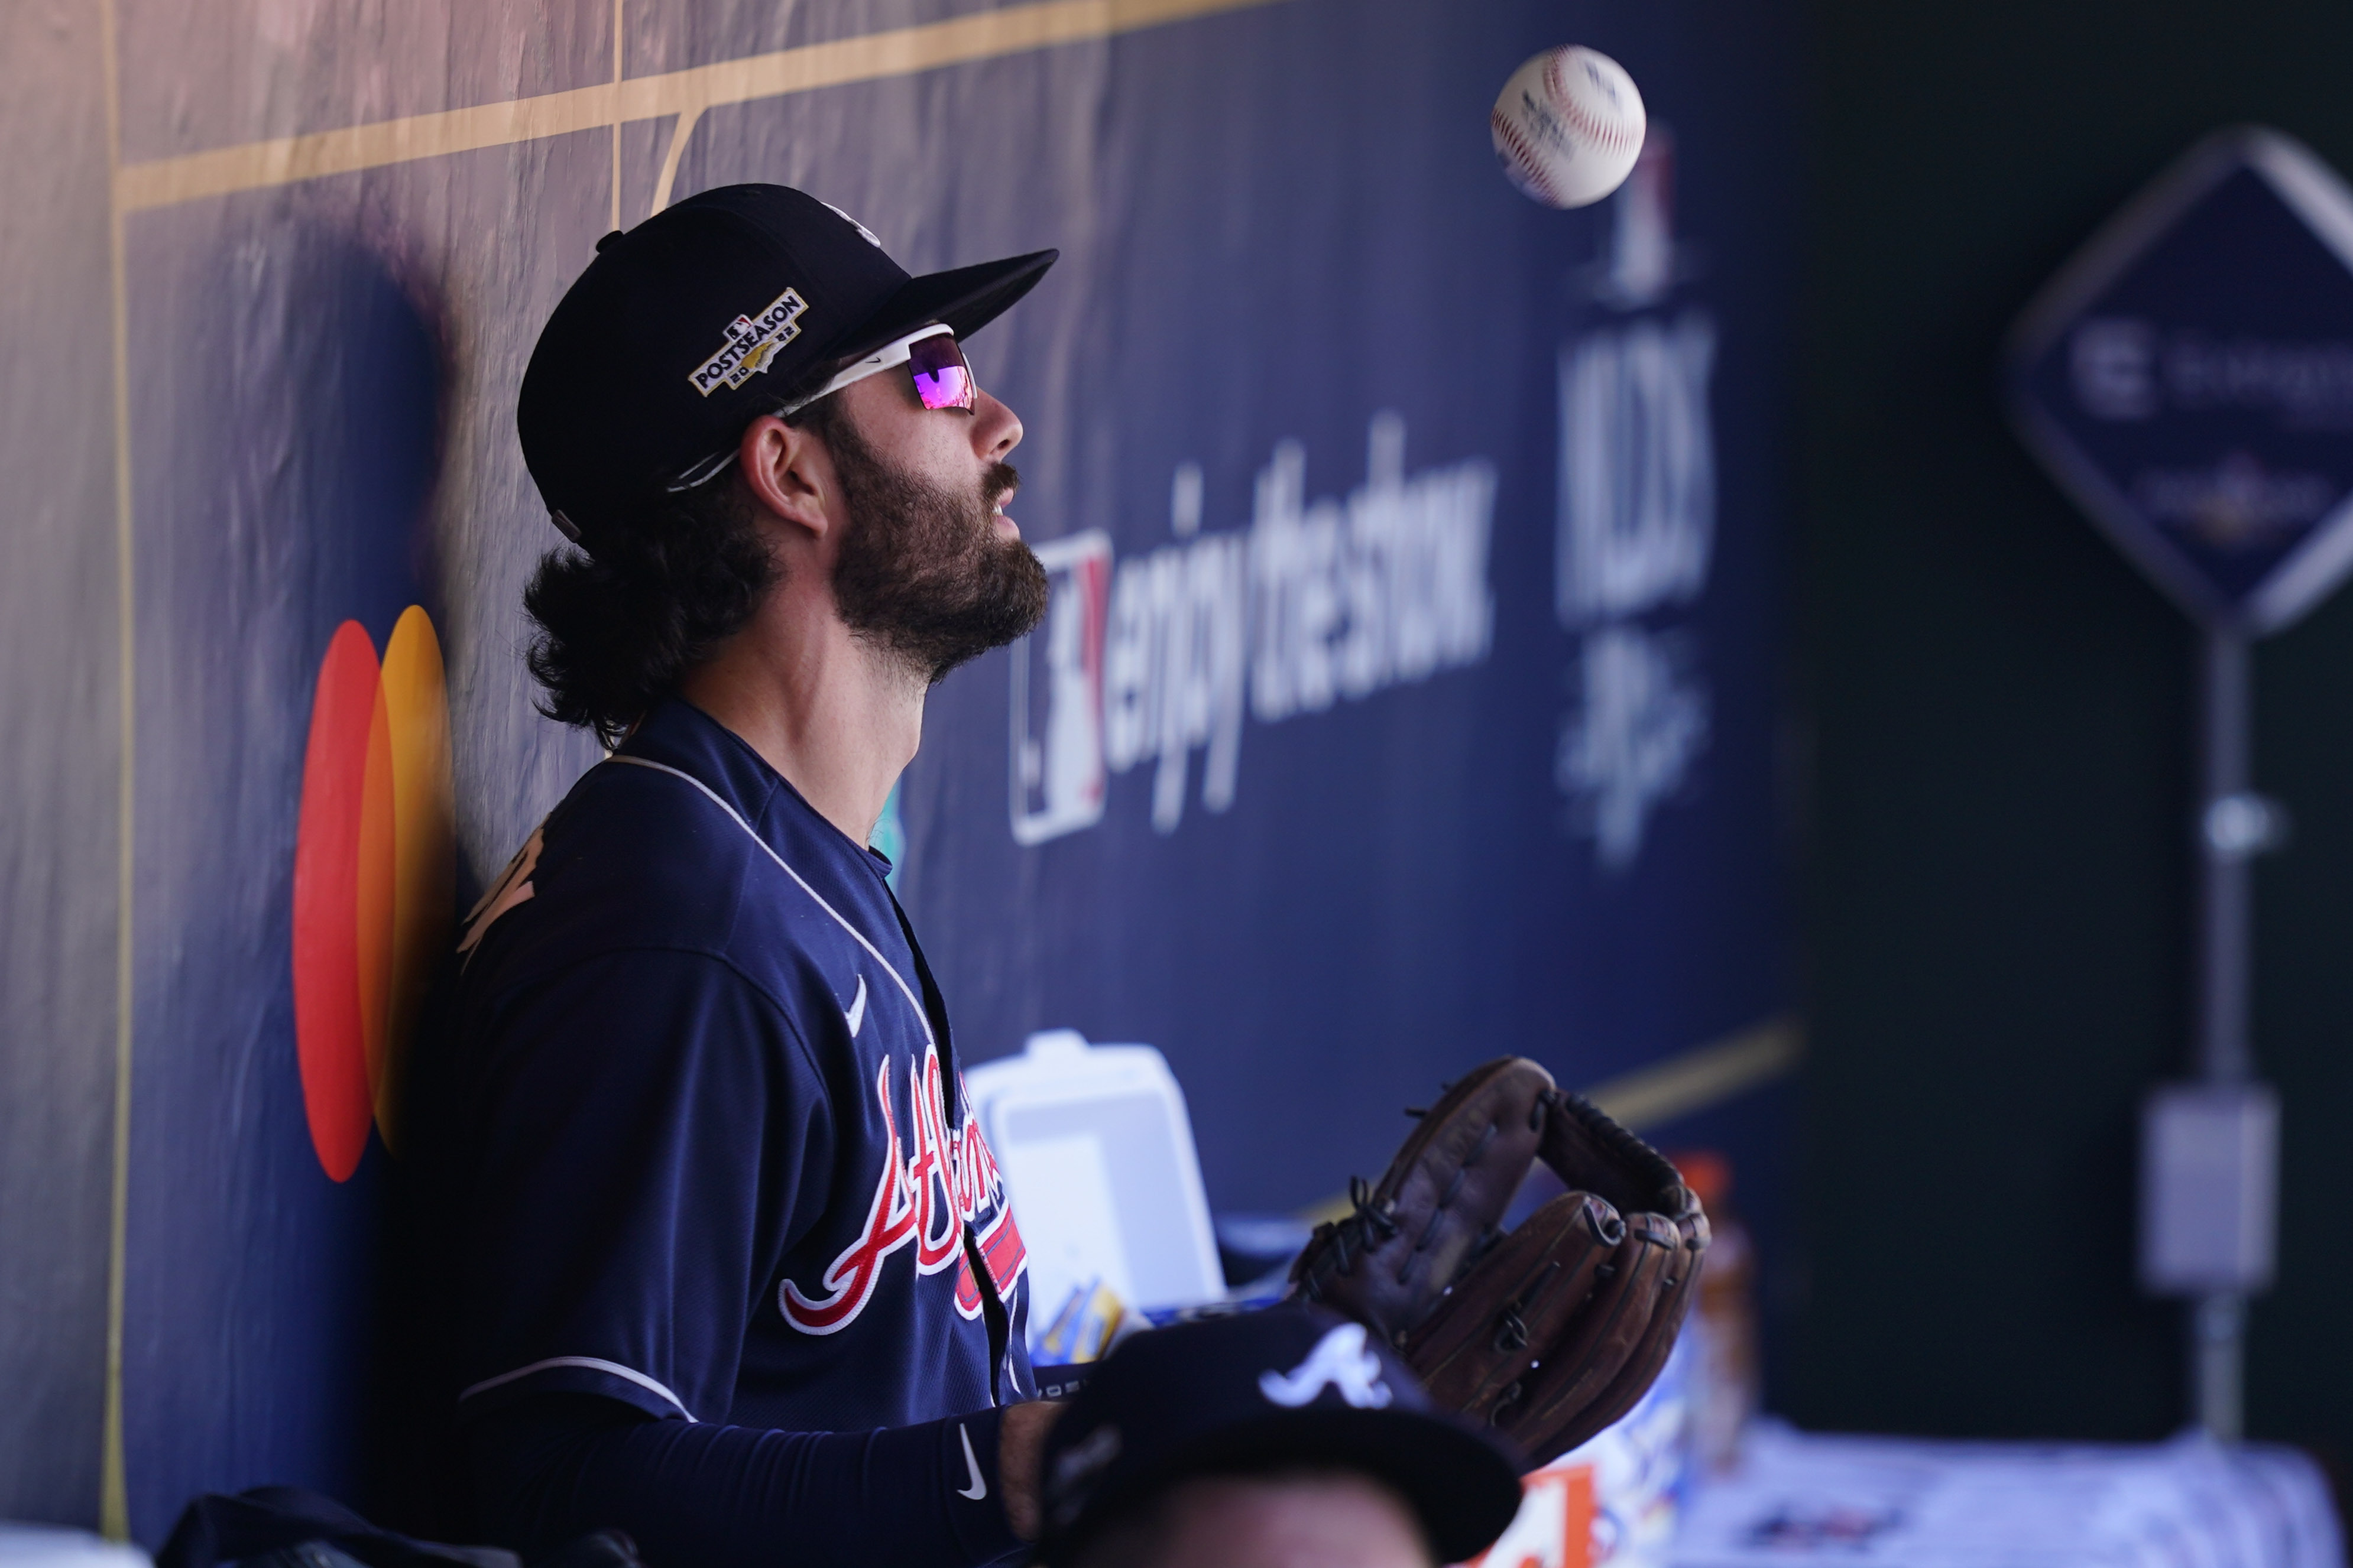 Report: Cubs sign all-star SS Dansby Swanson